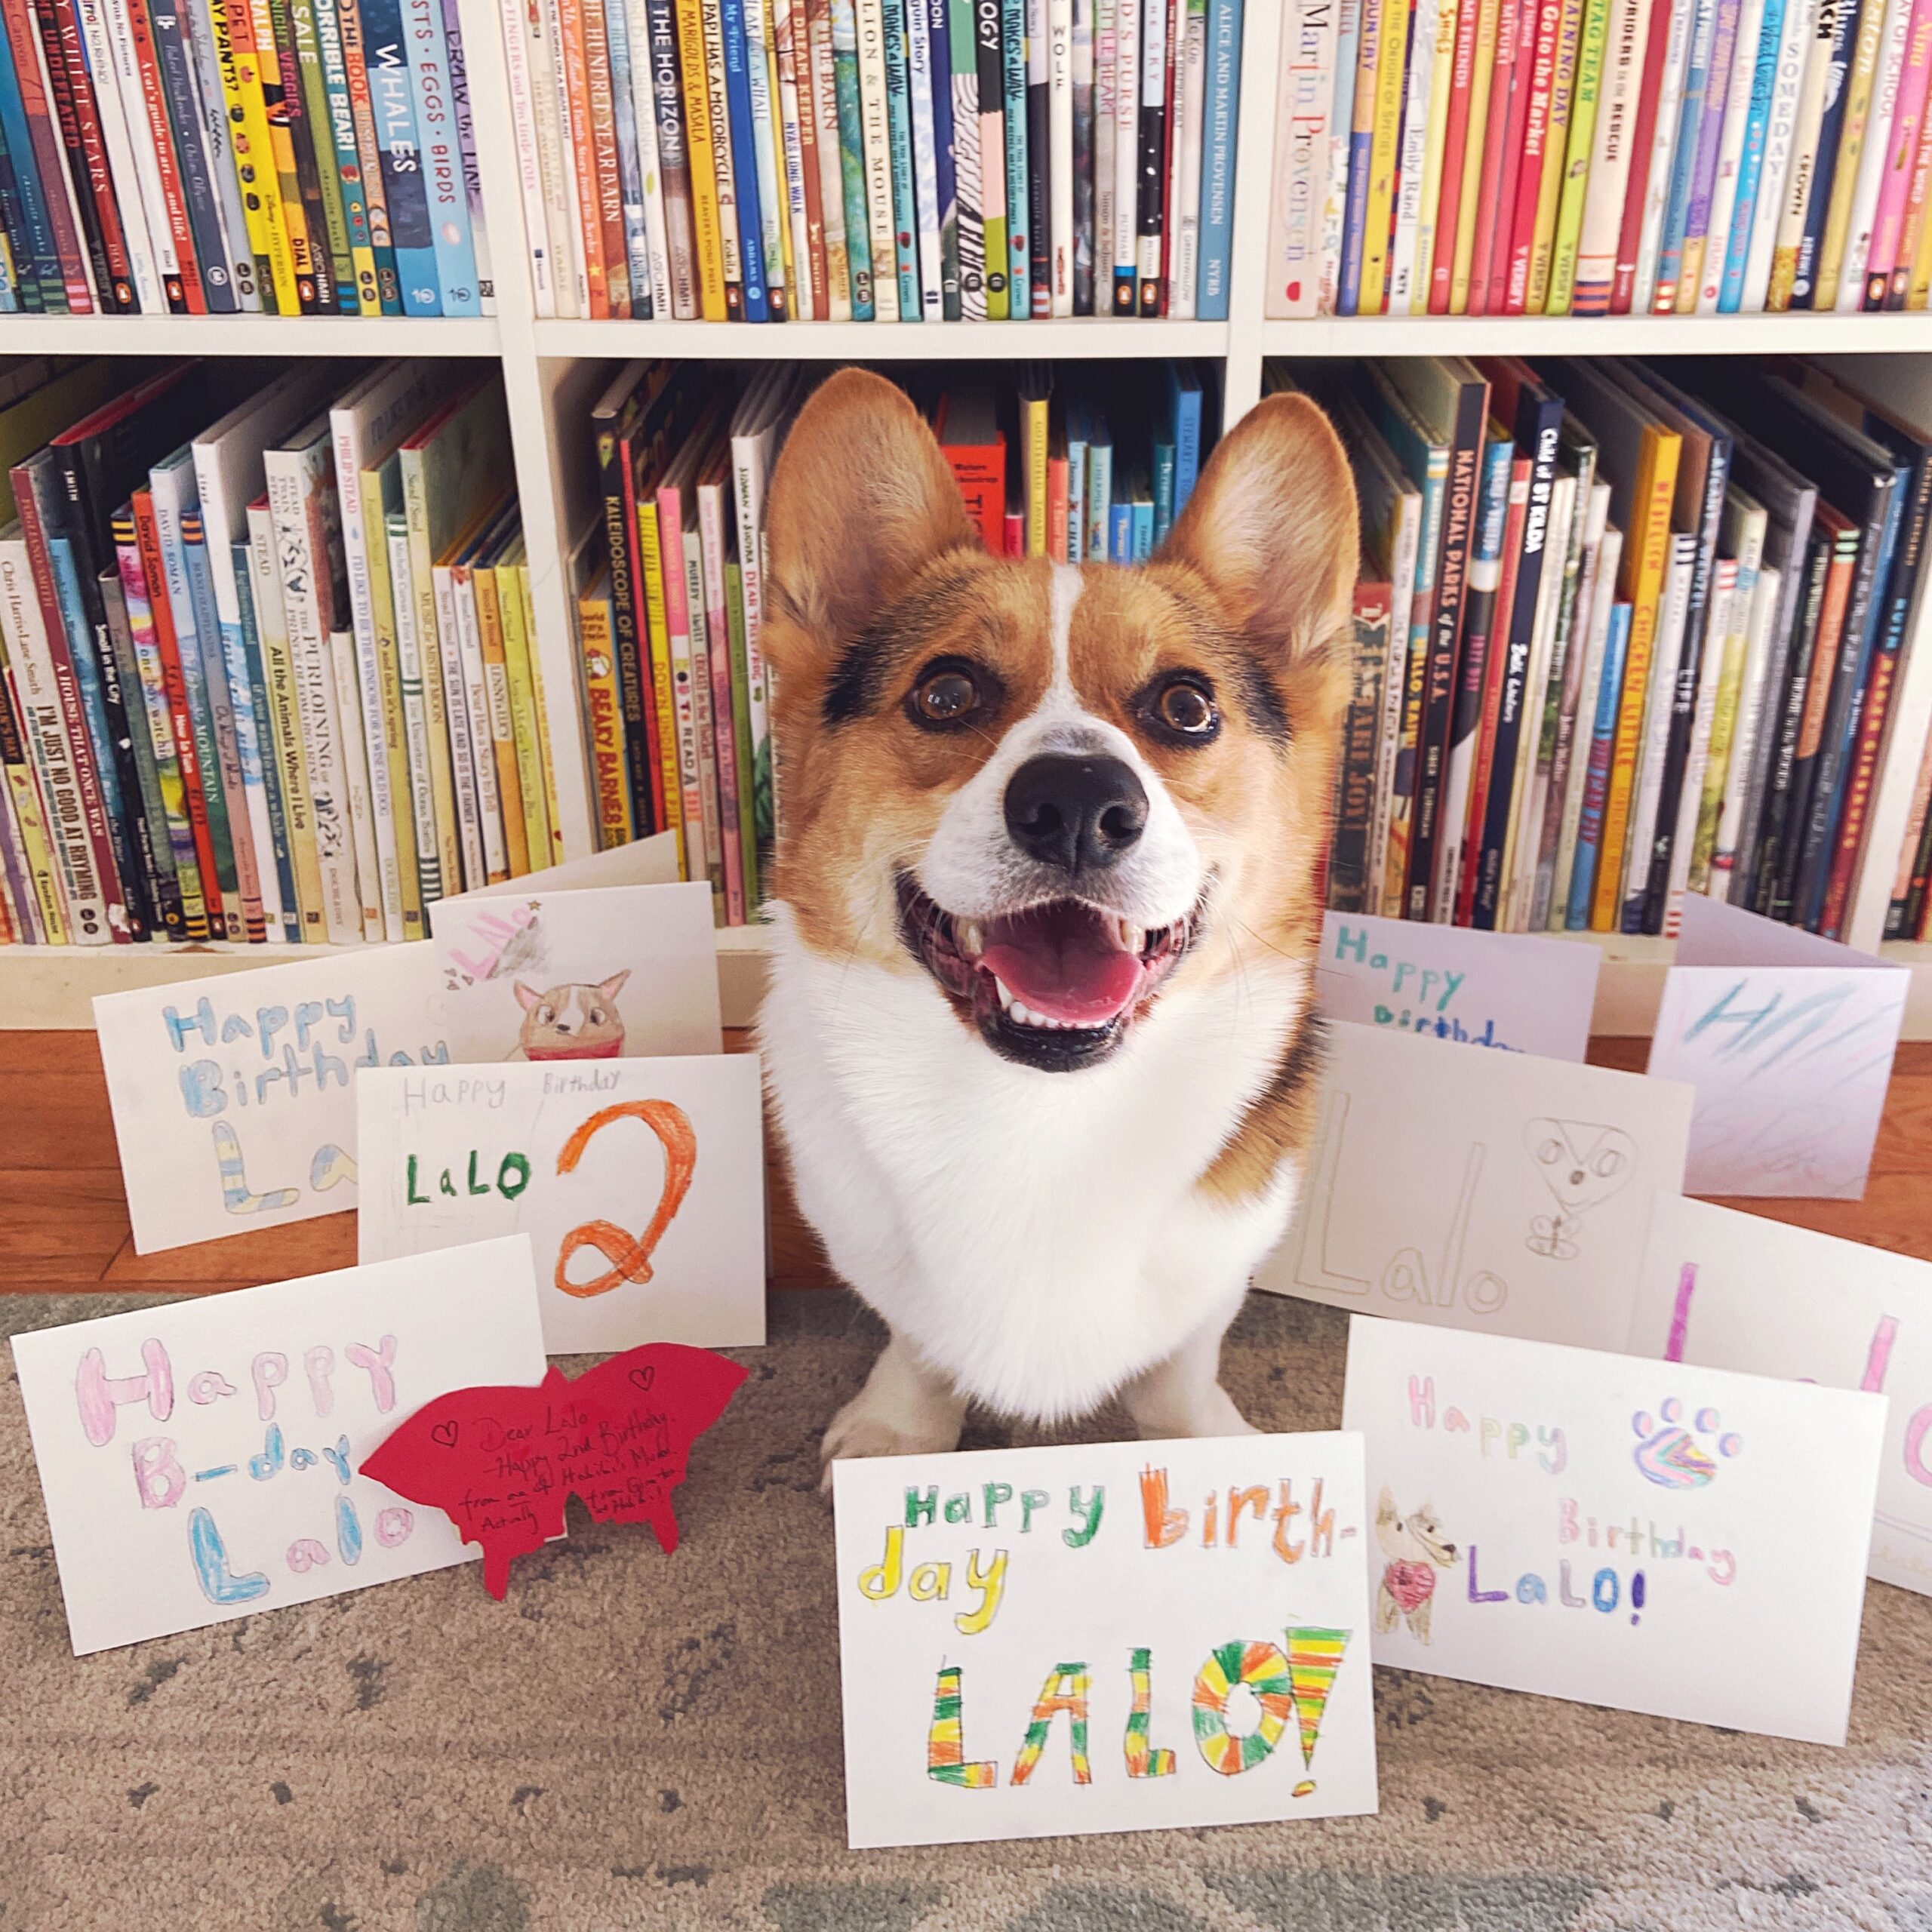 Lalo the corgi surrounded by birthday cards